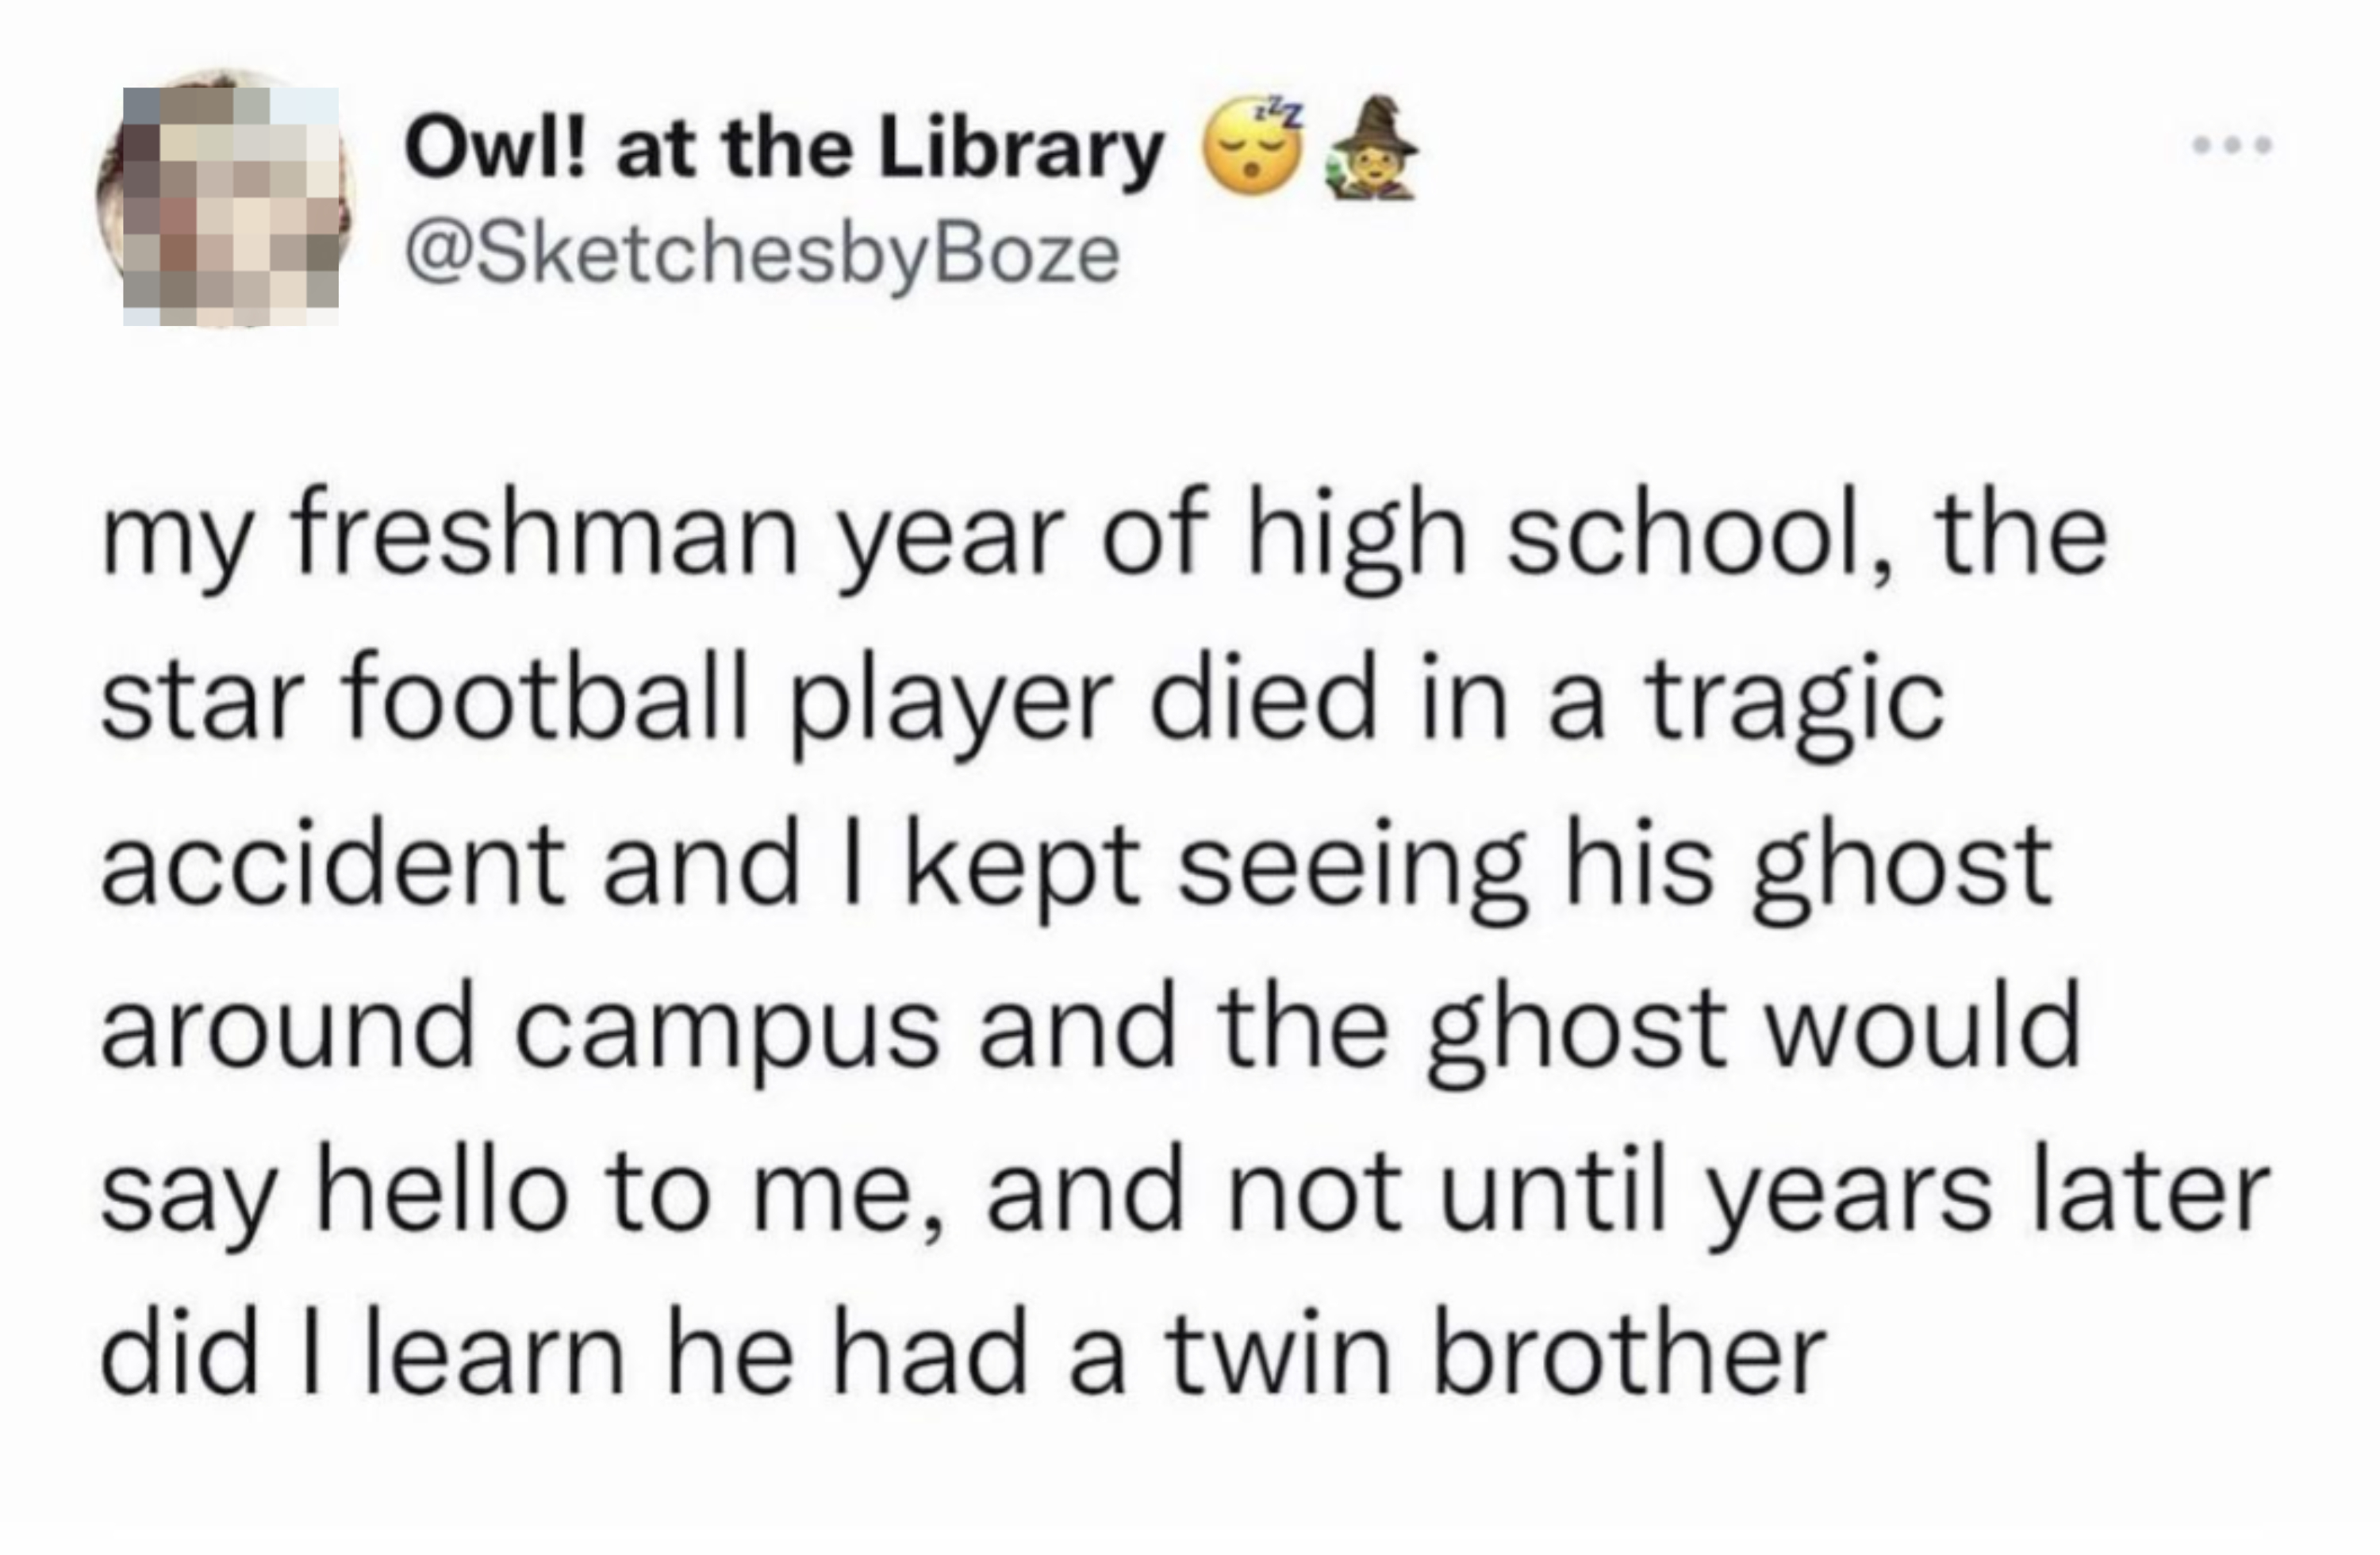 Twitter post by SketchesbyBoze recounting a story of seeing a ghost who turned out to be the twin of a deceased football player